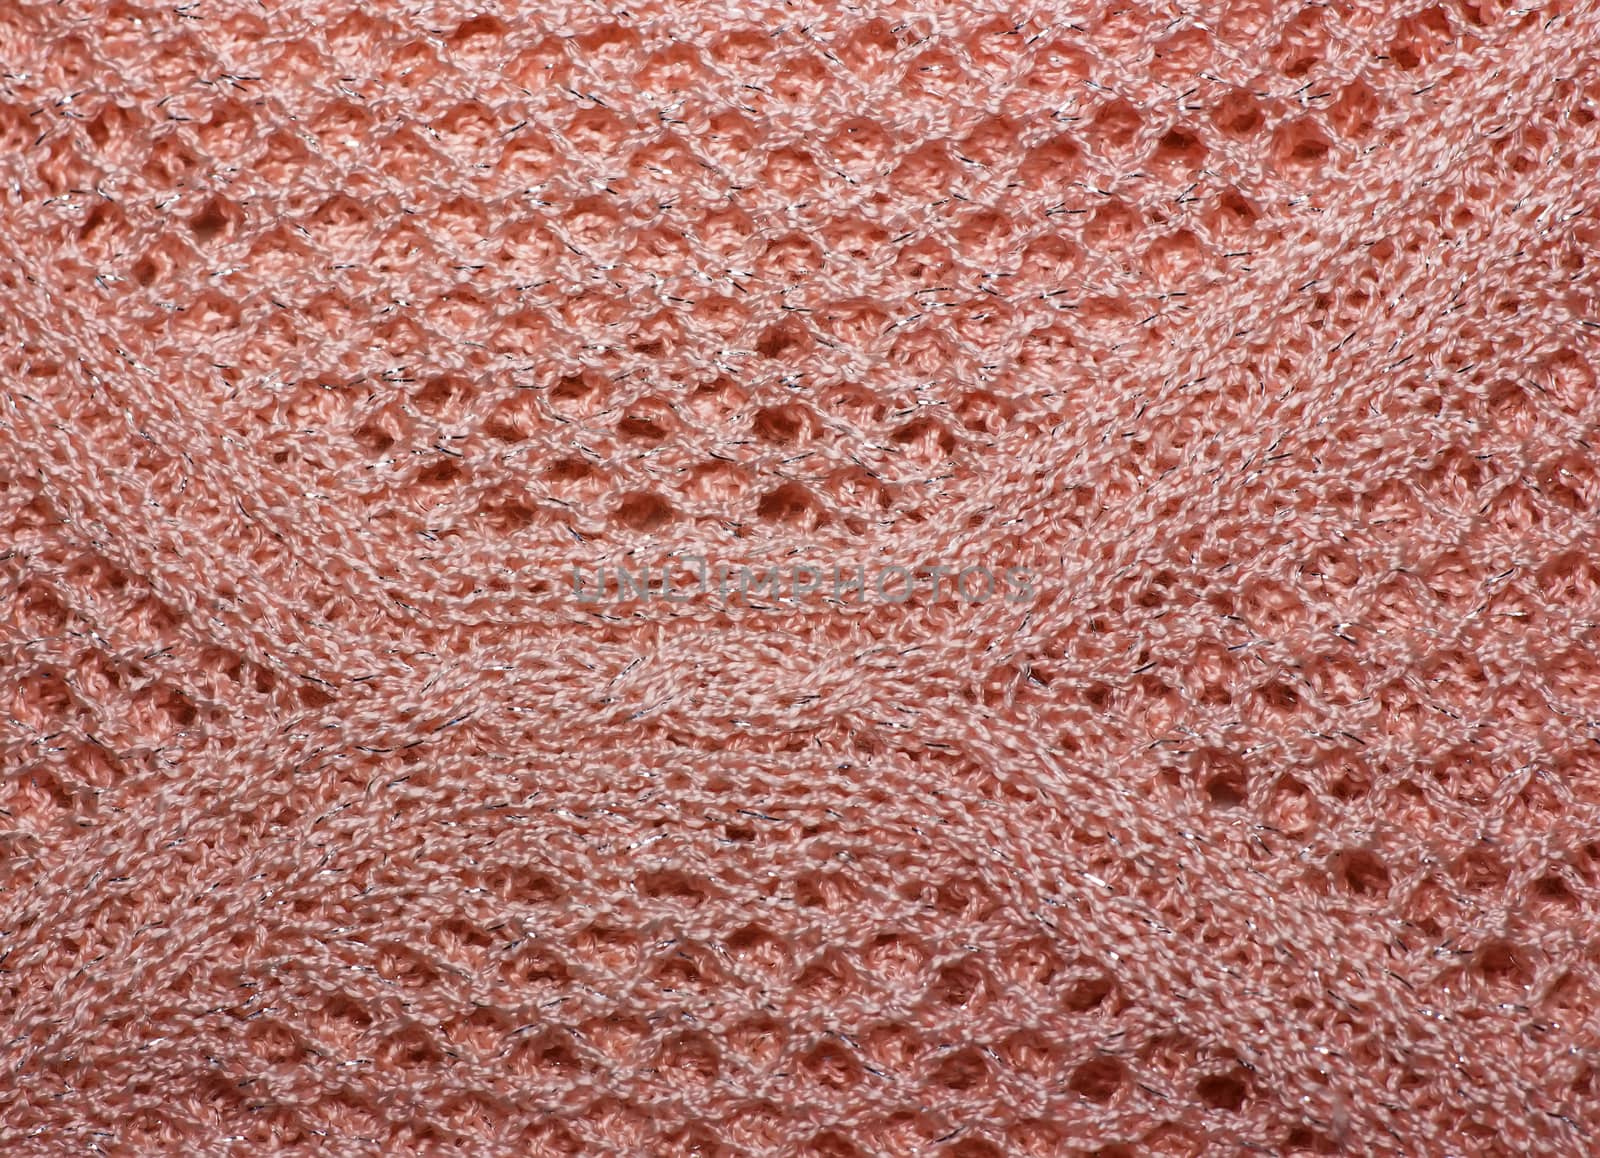 Pink knitted wool fabric texture closeup. with lurex thread, Jer by KoliadzynskaIryna